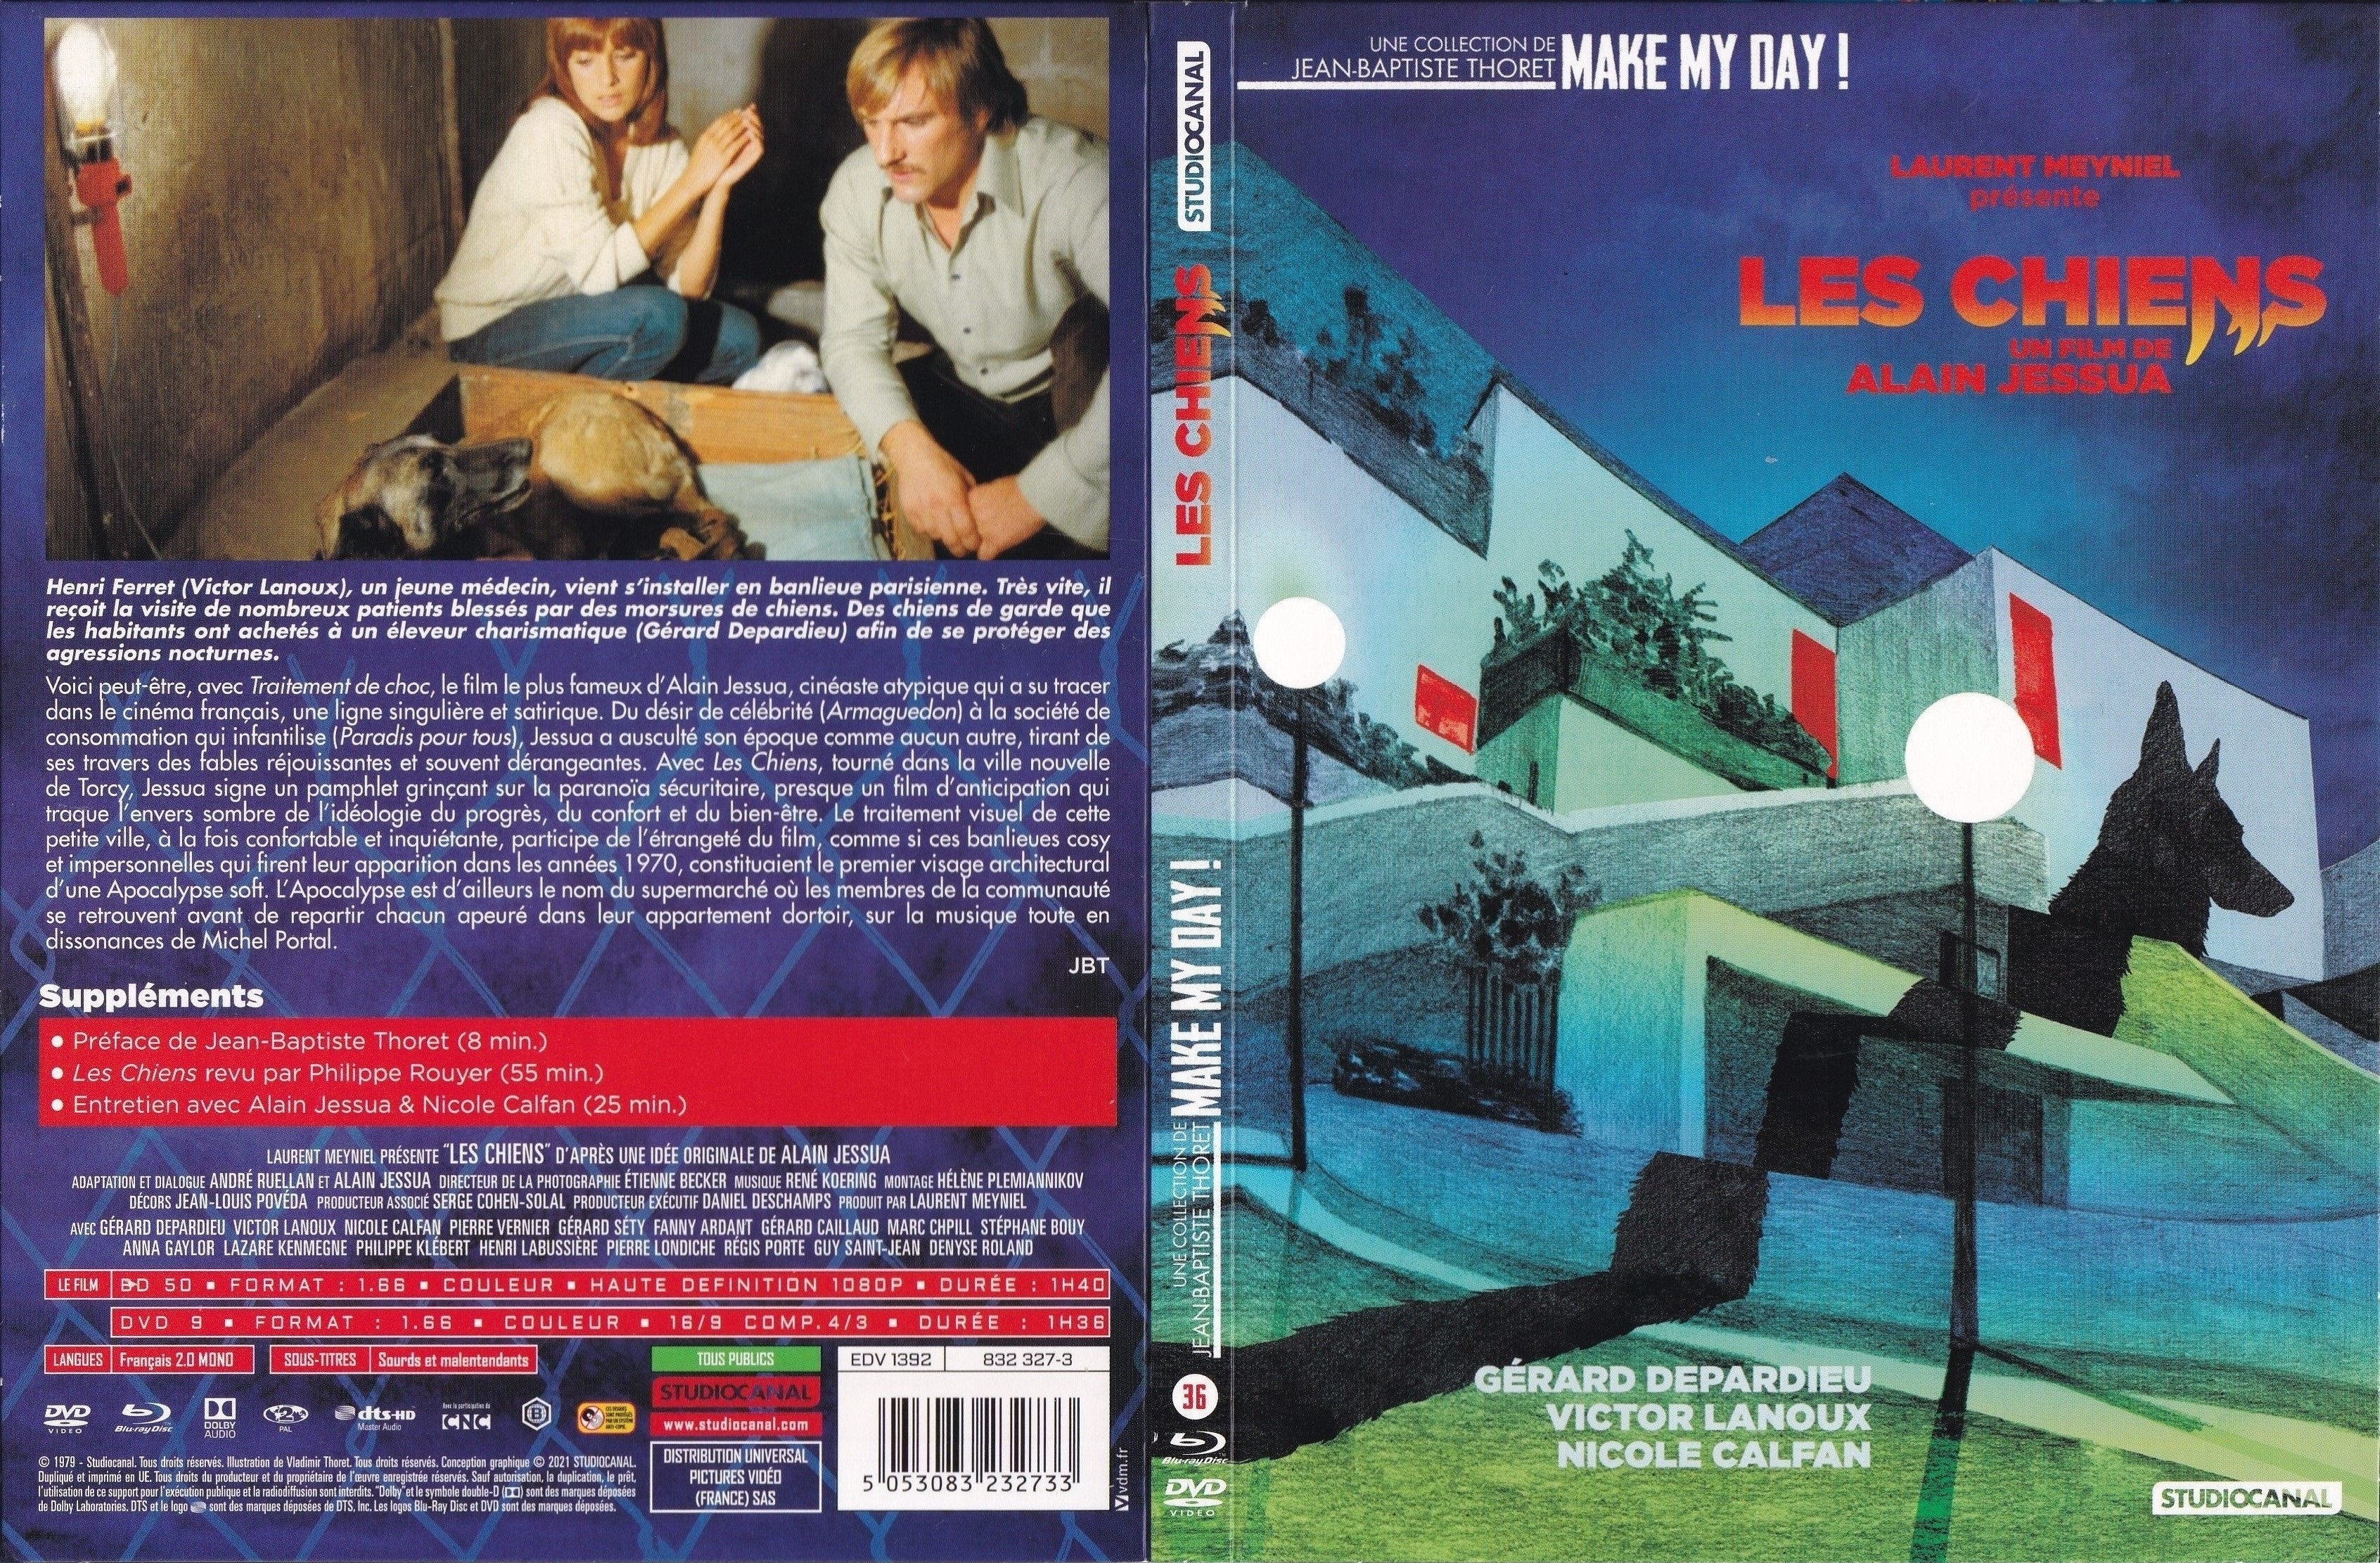 Jaquette DVD Les Chiens (BLU-RAY)